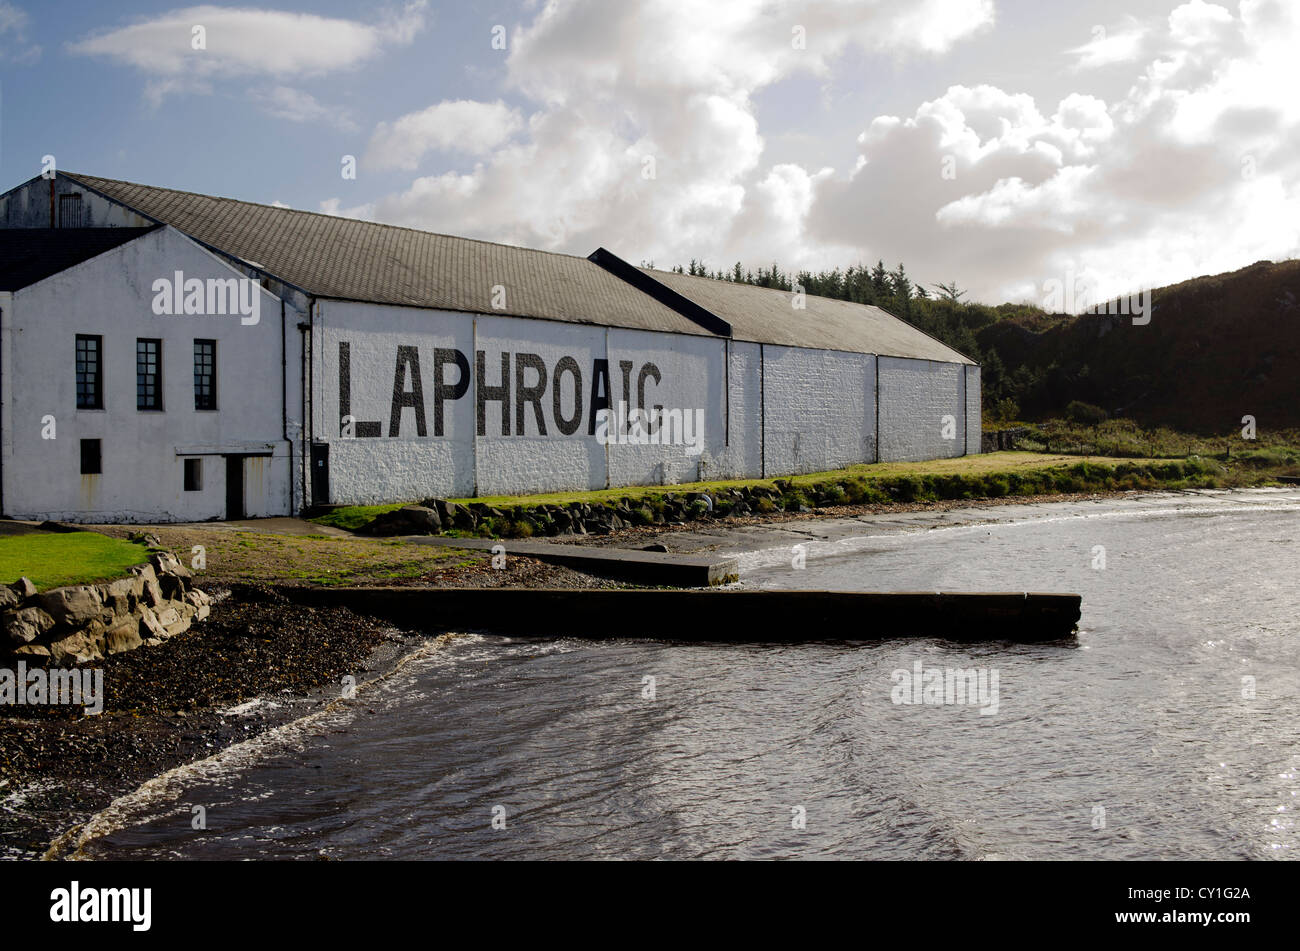 One of the buildings at the Laphroaig malt whisky distillery, Islay, Scotland as seen from the coast. Stock Photo